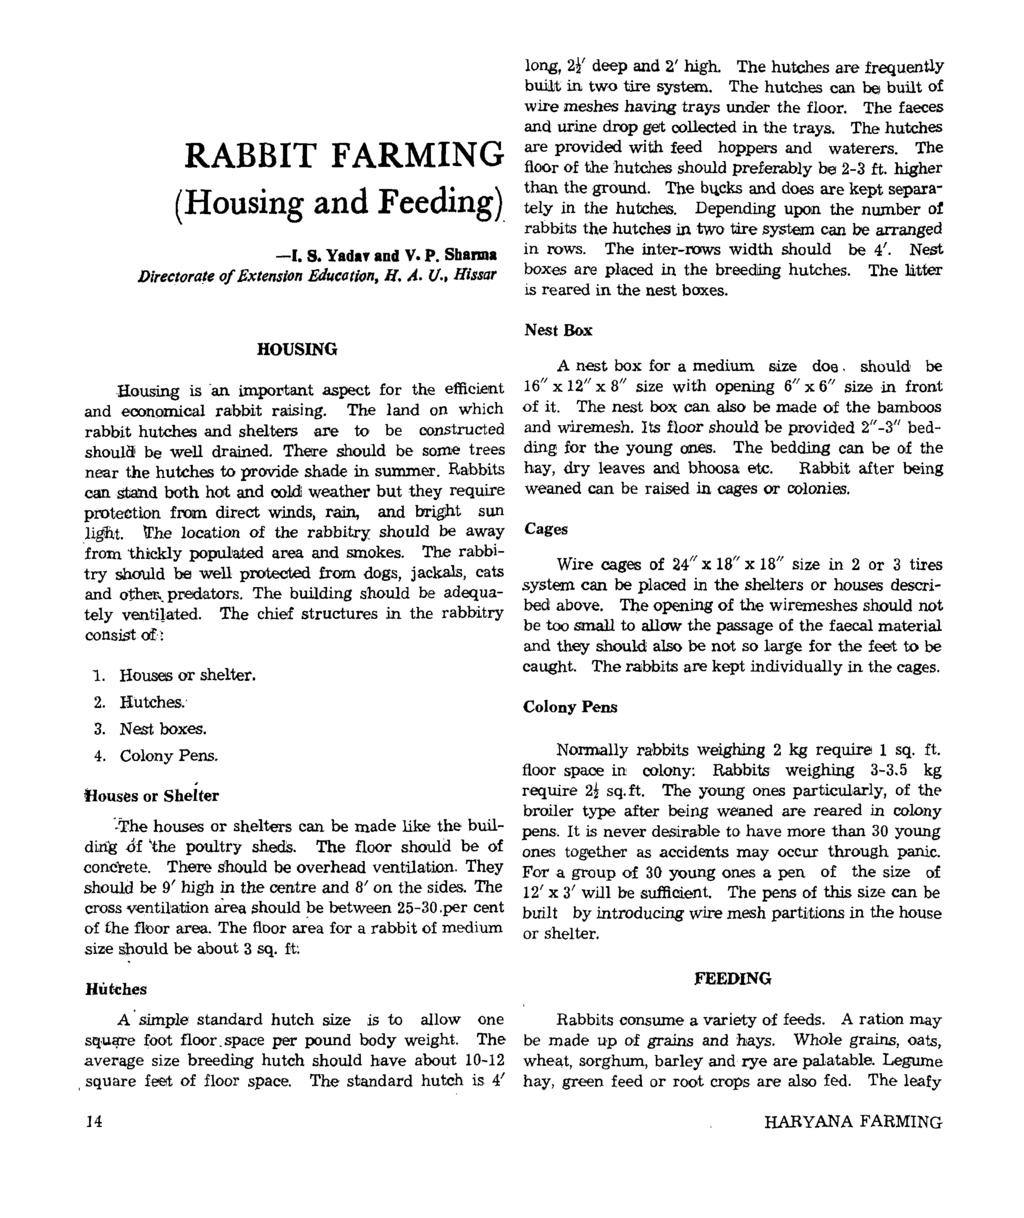 RABBIT FARMING (Housing and Feeding). -I. s. Yadaf and V. P. Sharma Directorate of Extension Education, H. A. U.